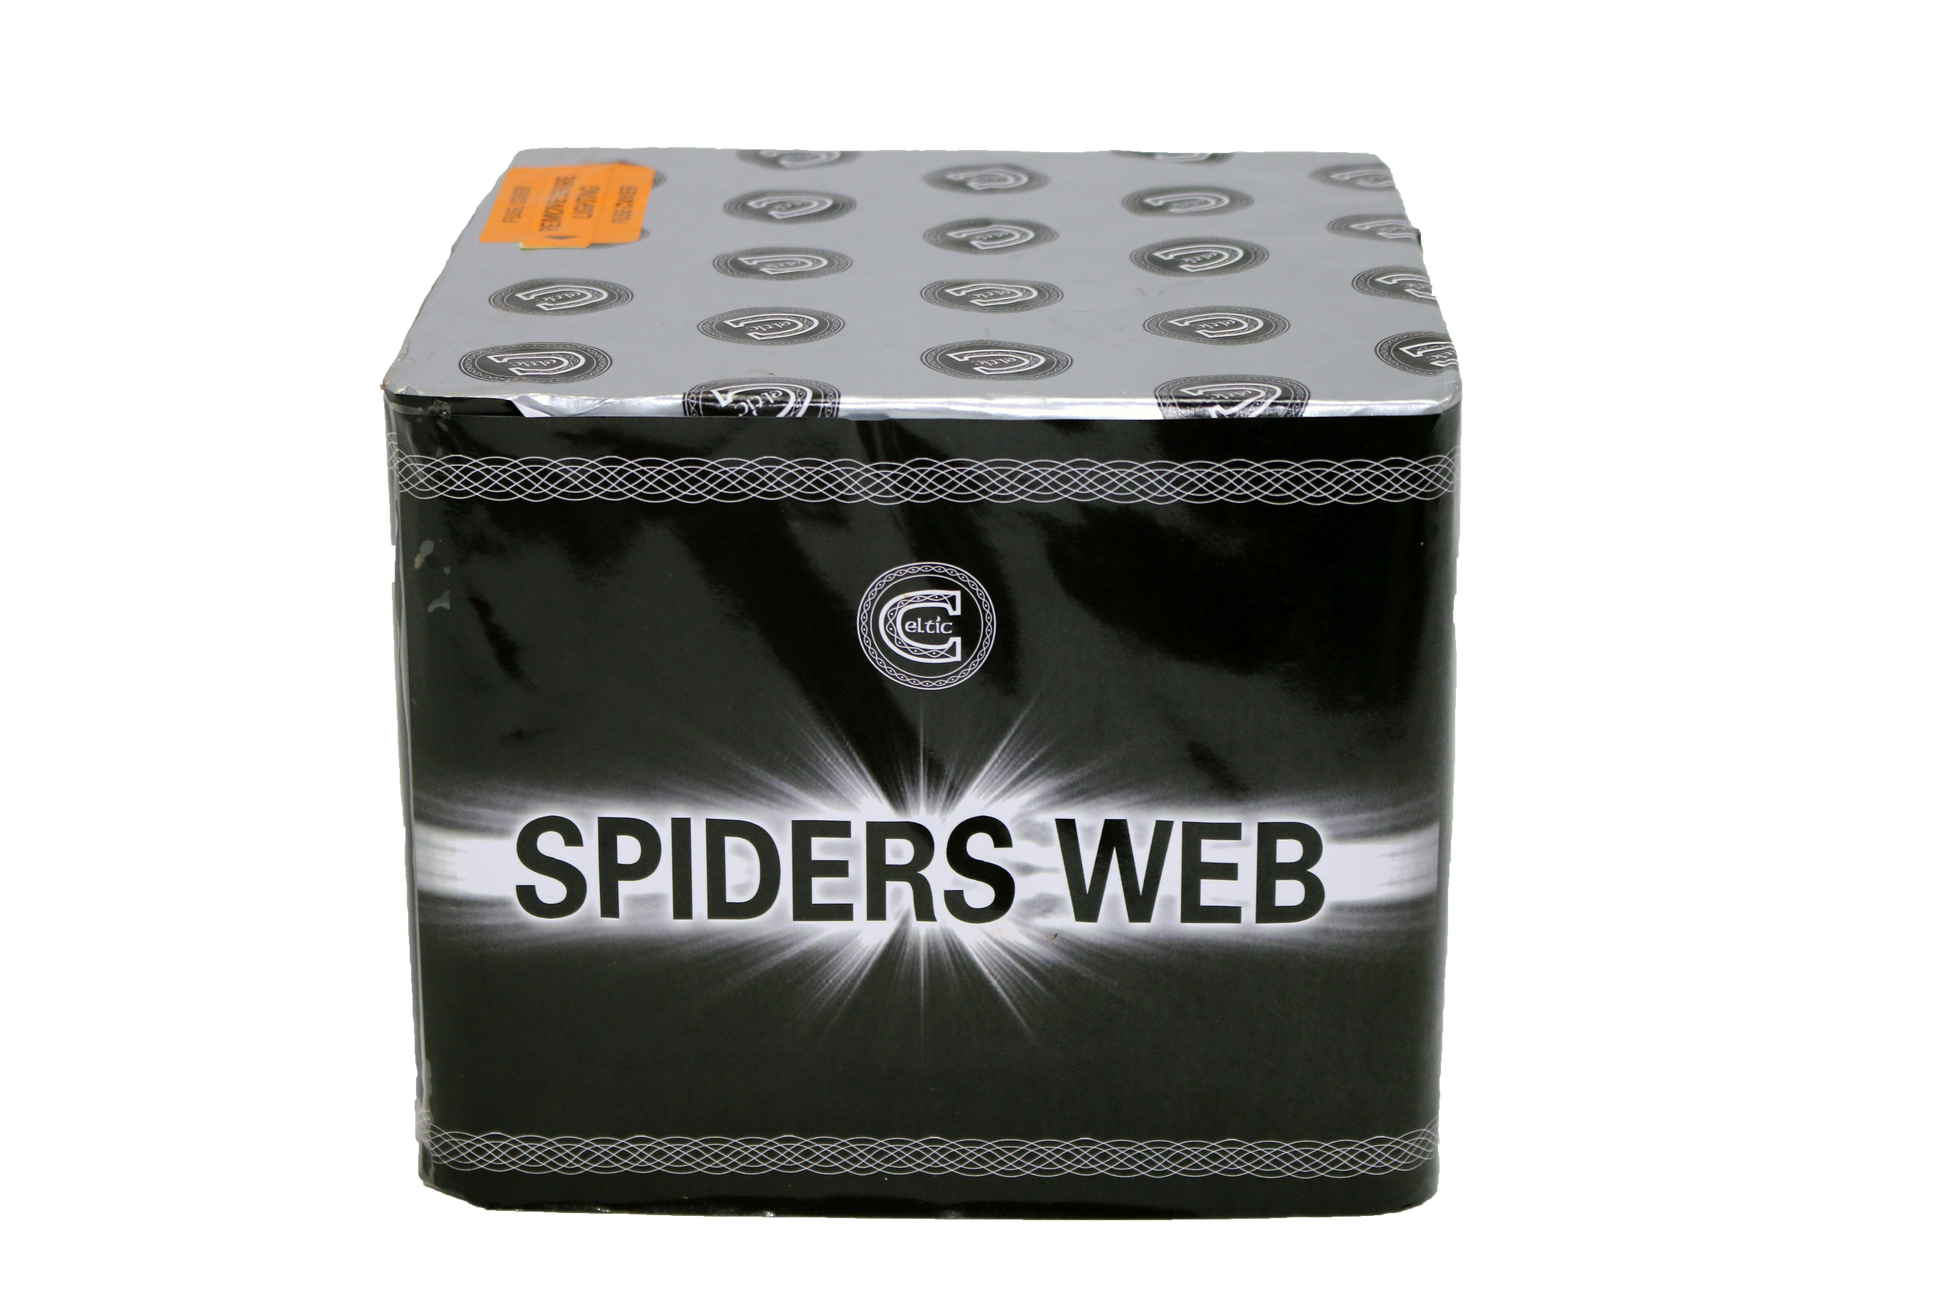 Spiders Web by Celtic Fireworks face on